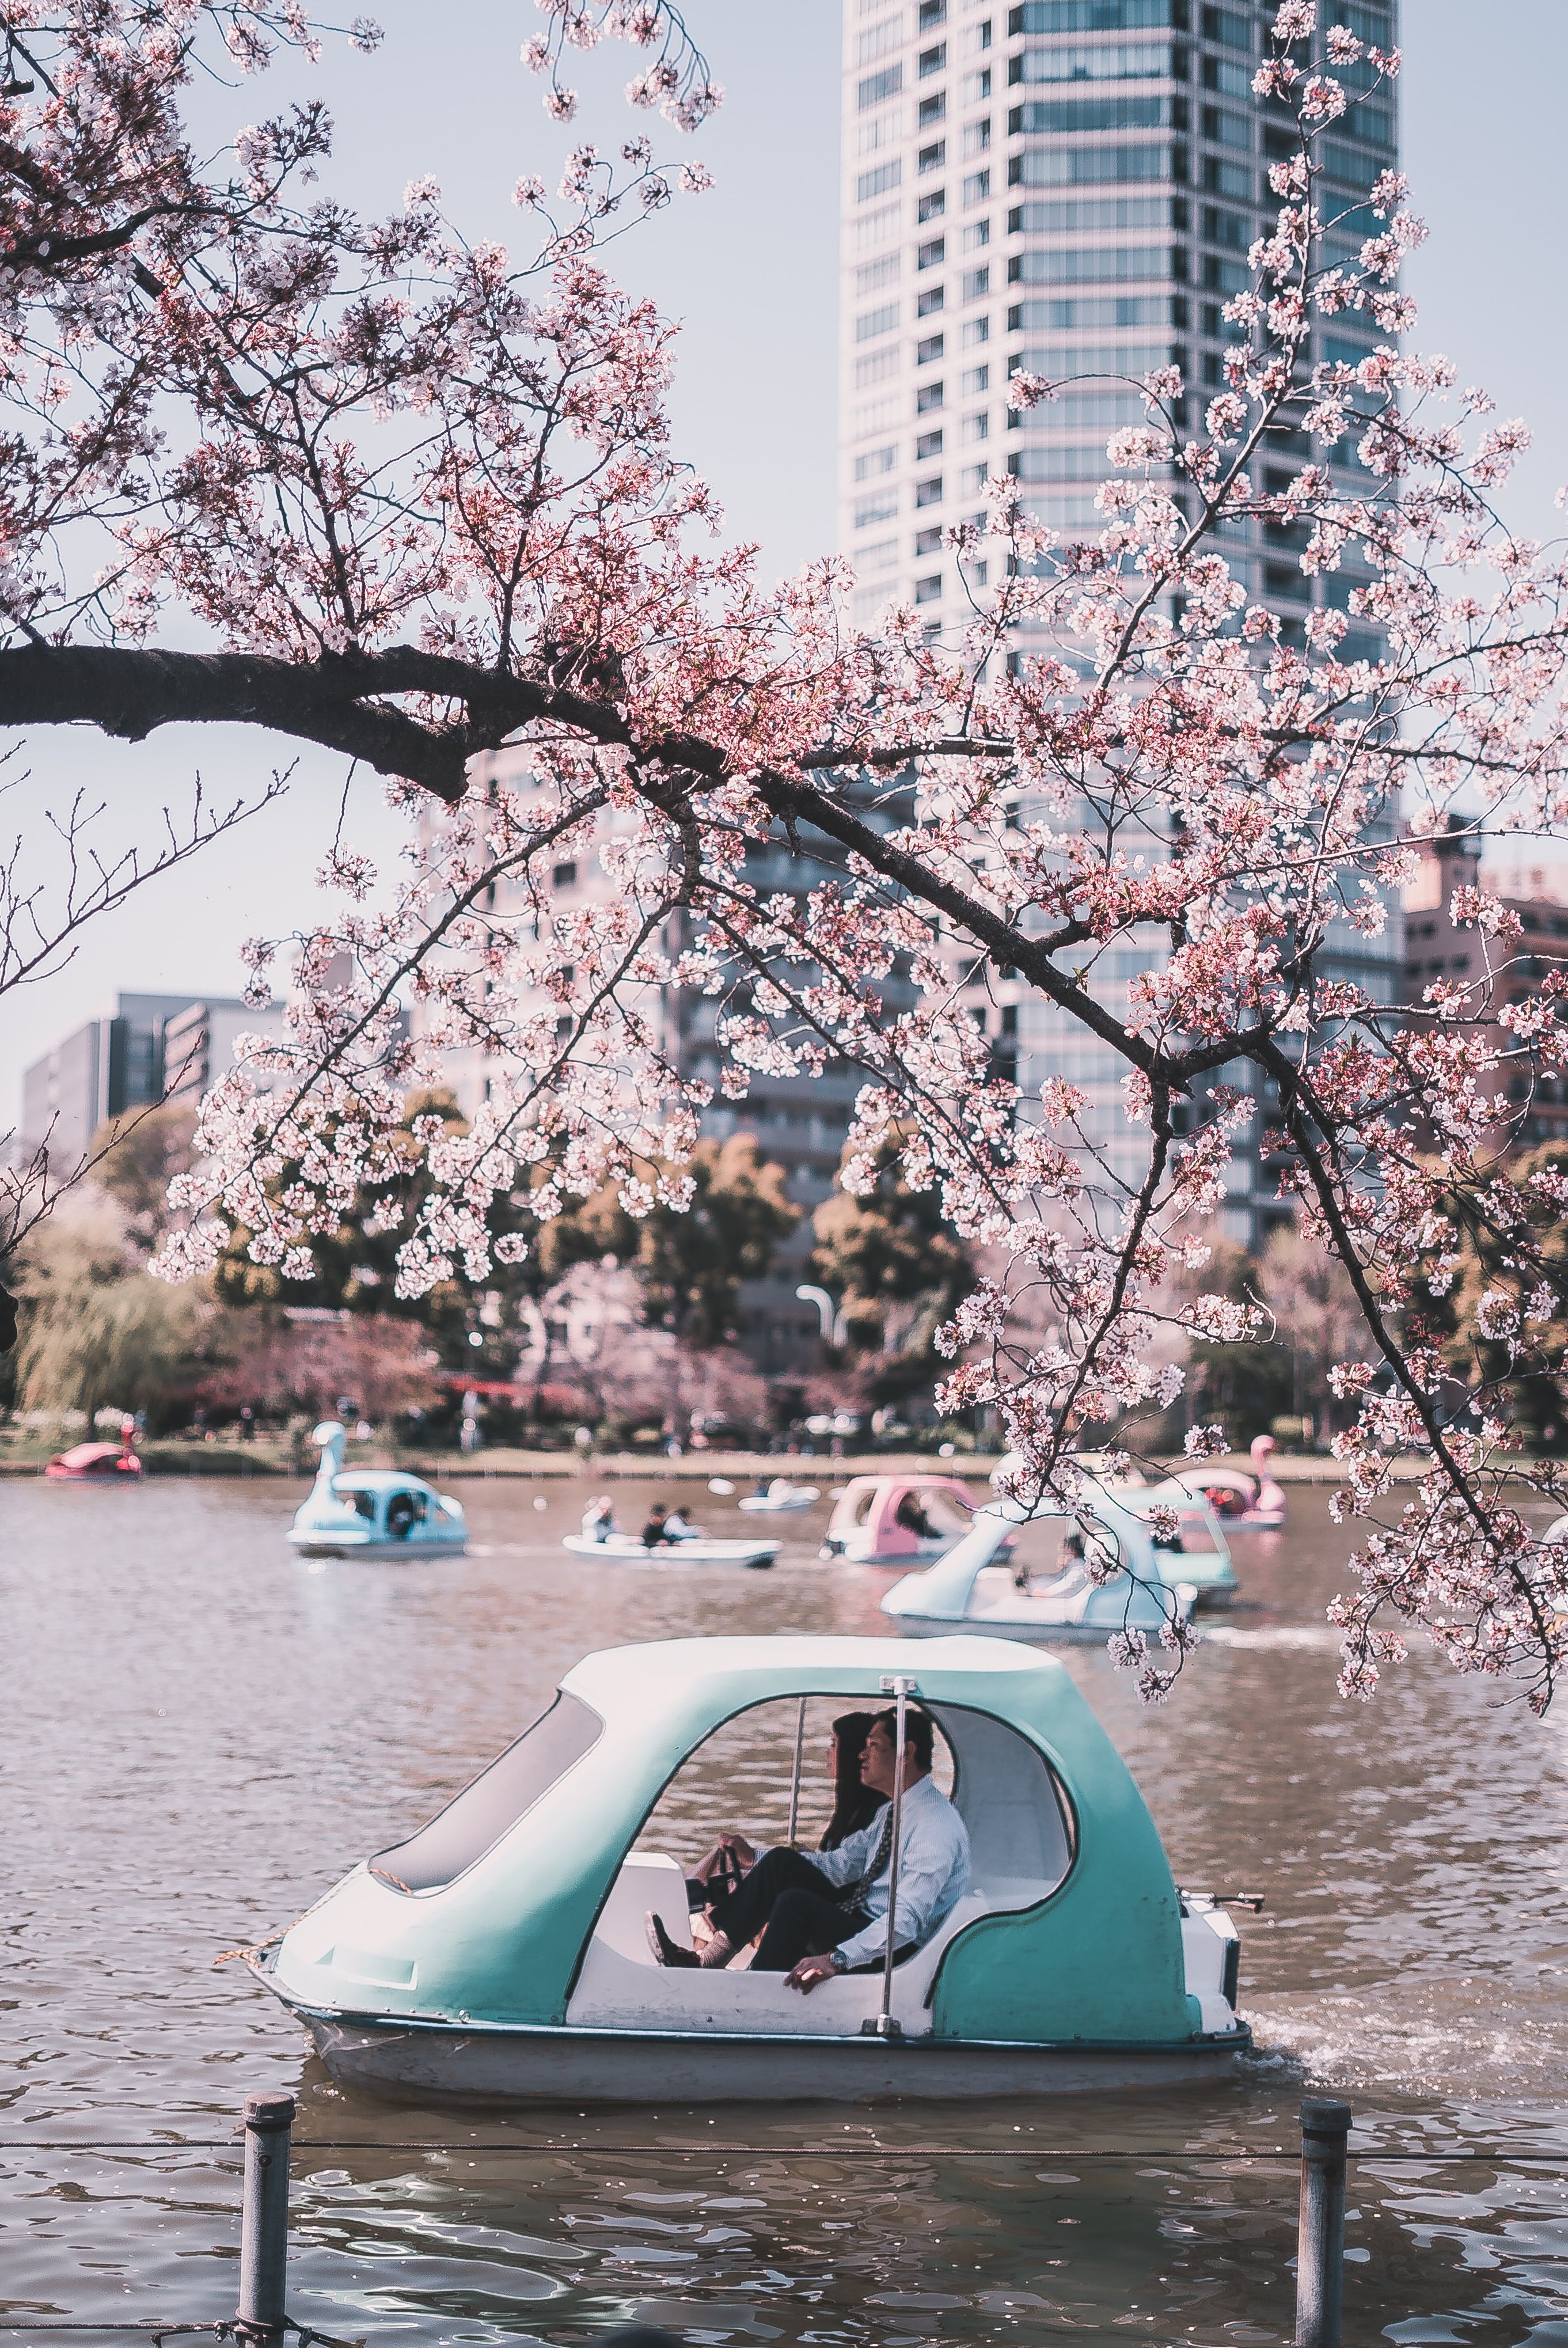 People playing in the water surrounded by cherry blossom at Ueno Park in Tokyo